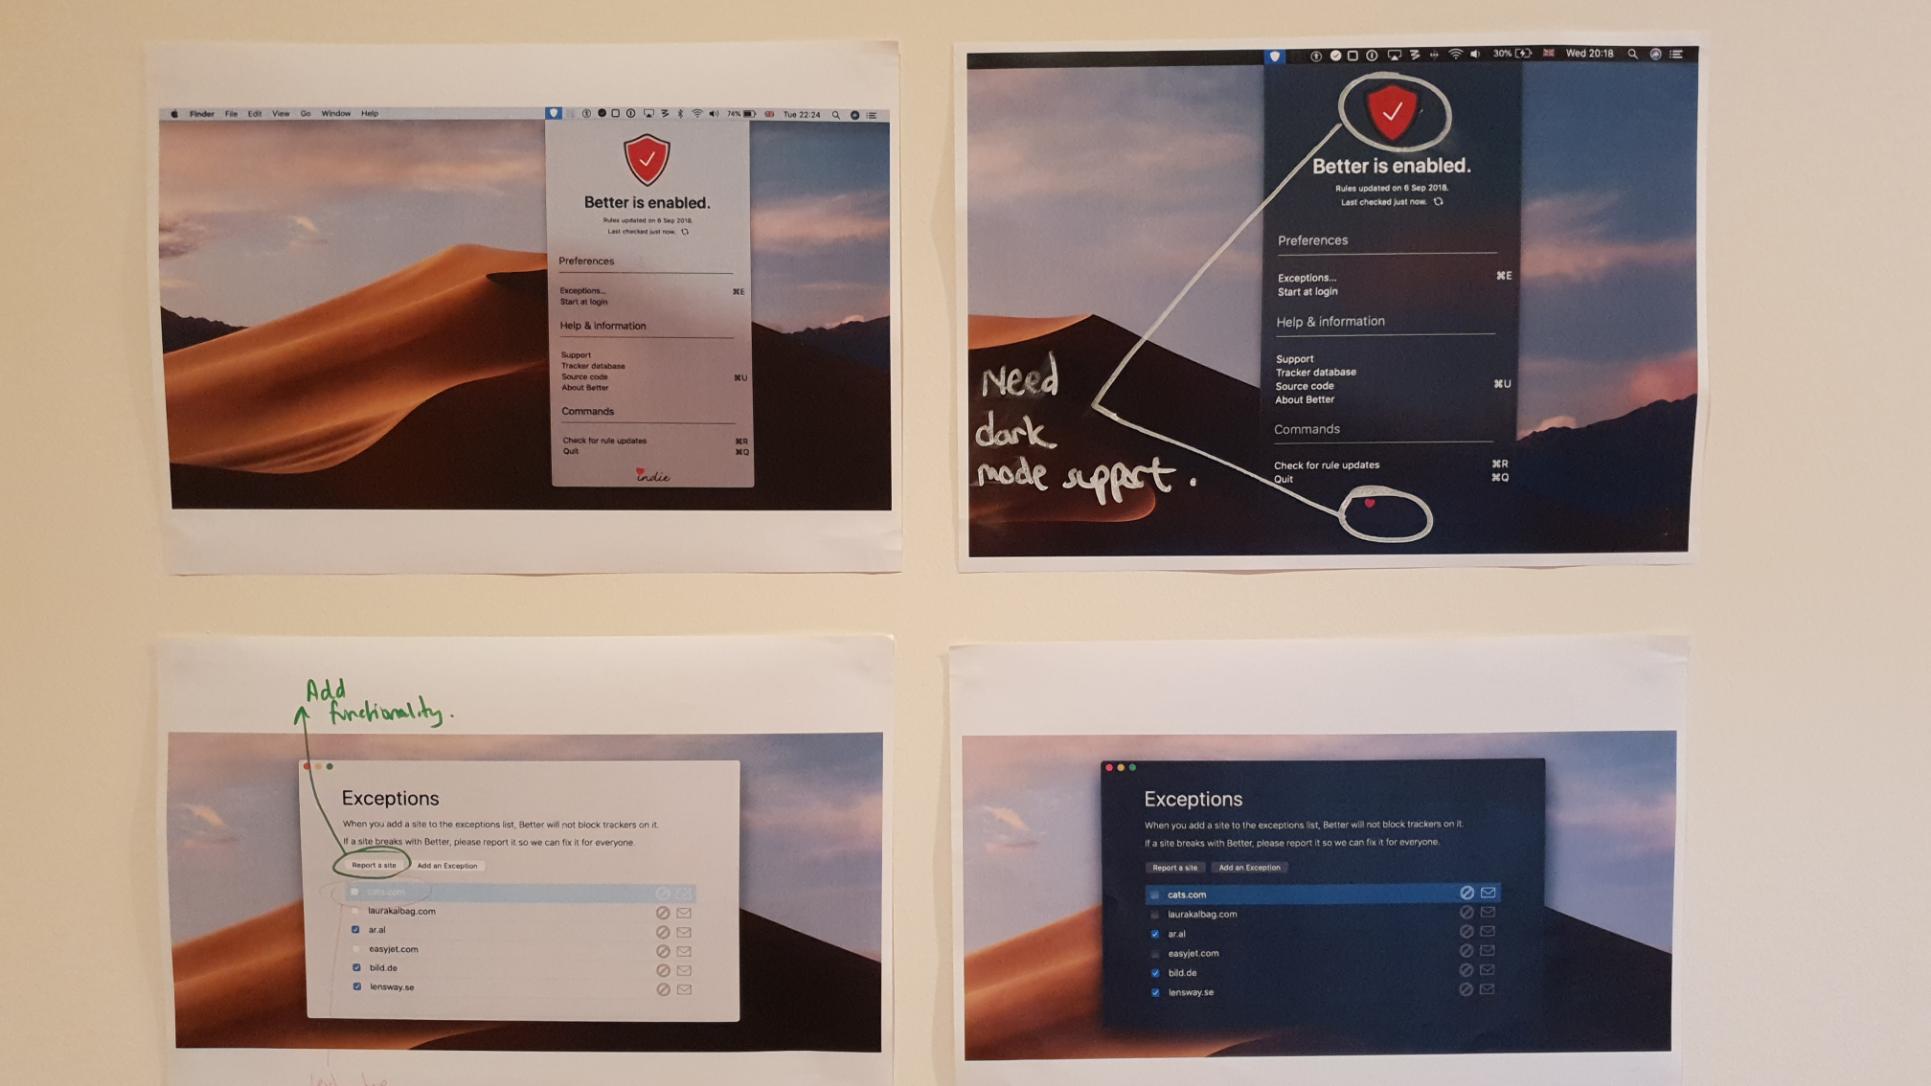 Some printouts of the new Mac client for Better showing the new design and macOS Dark Mode states.